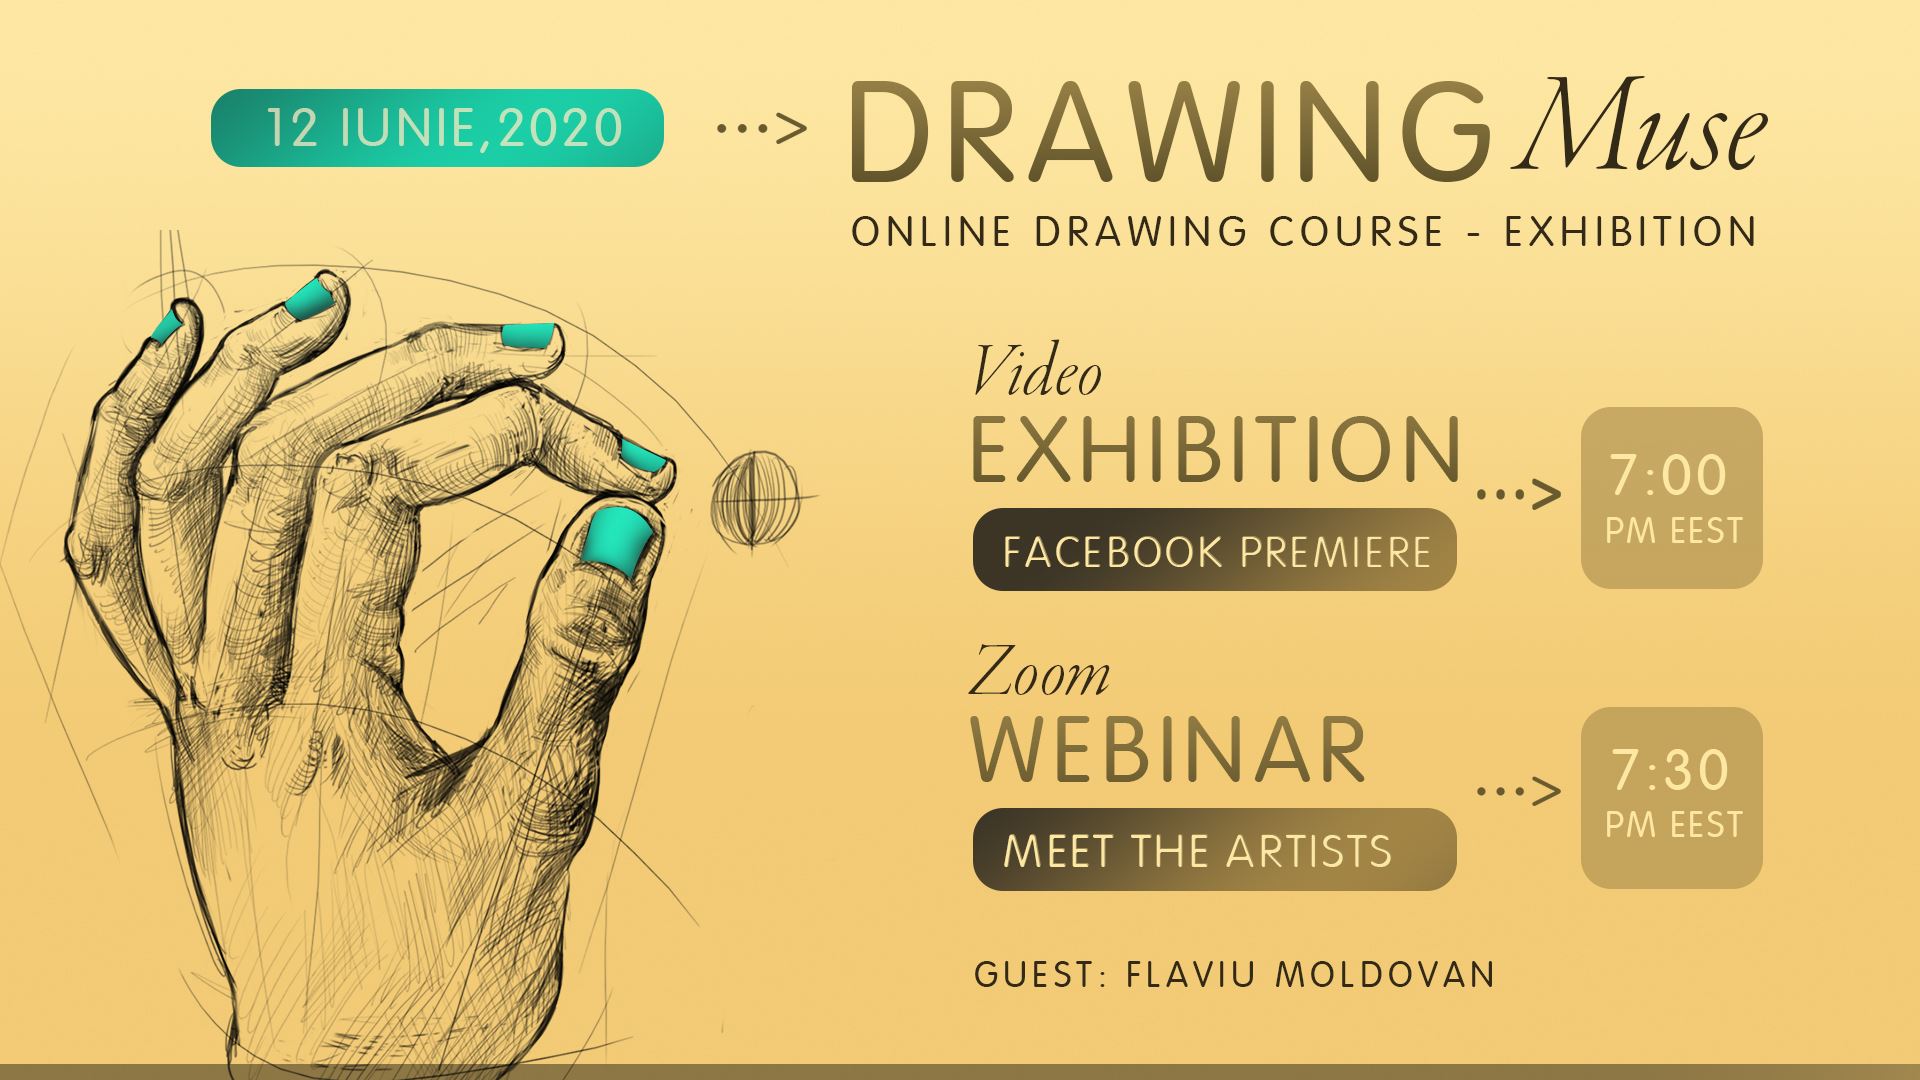 Drawing Muse Online Exhibition